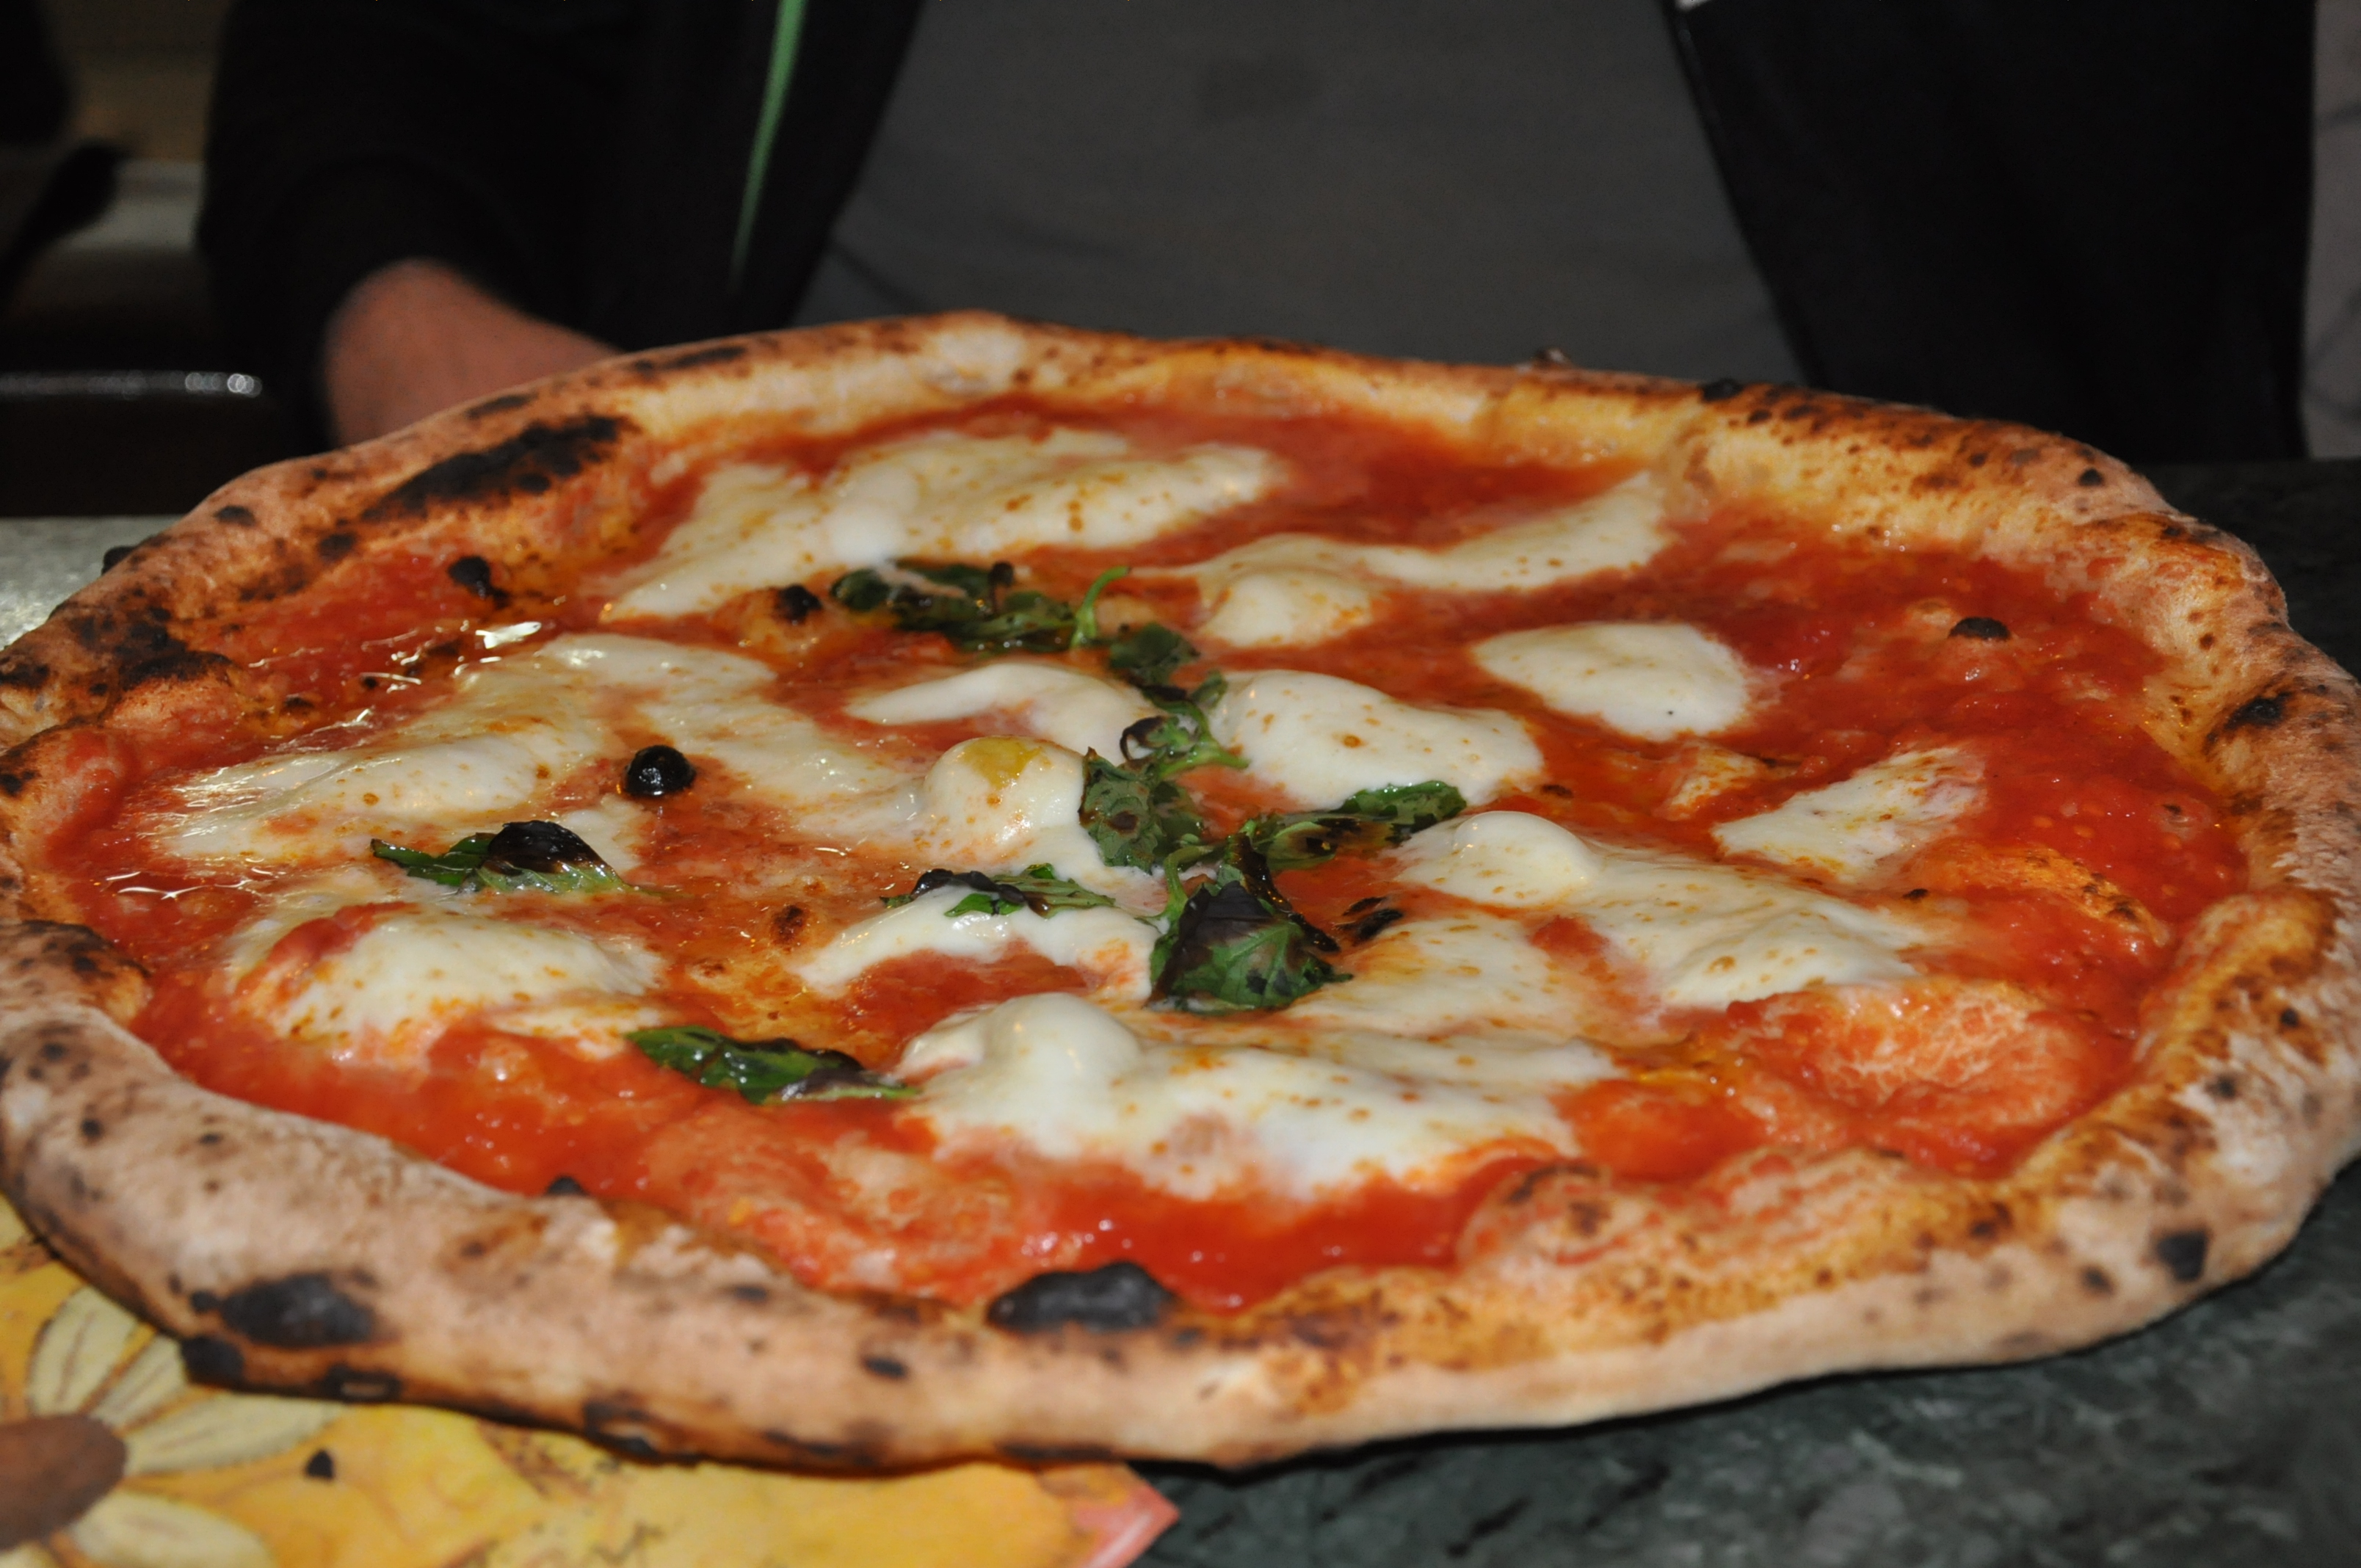 Yes, we ate this pizza in Naples. But if you follow our recipe, you can make pizza like this at home!